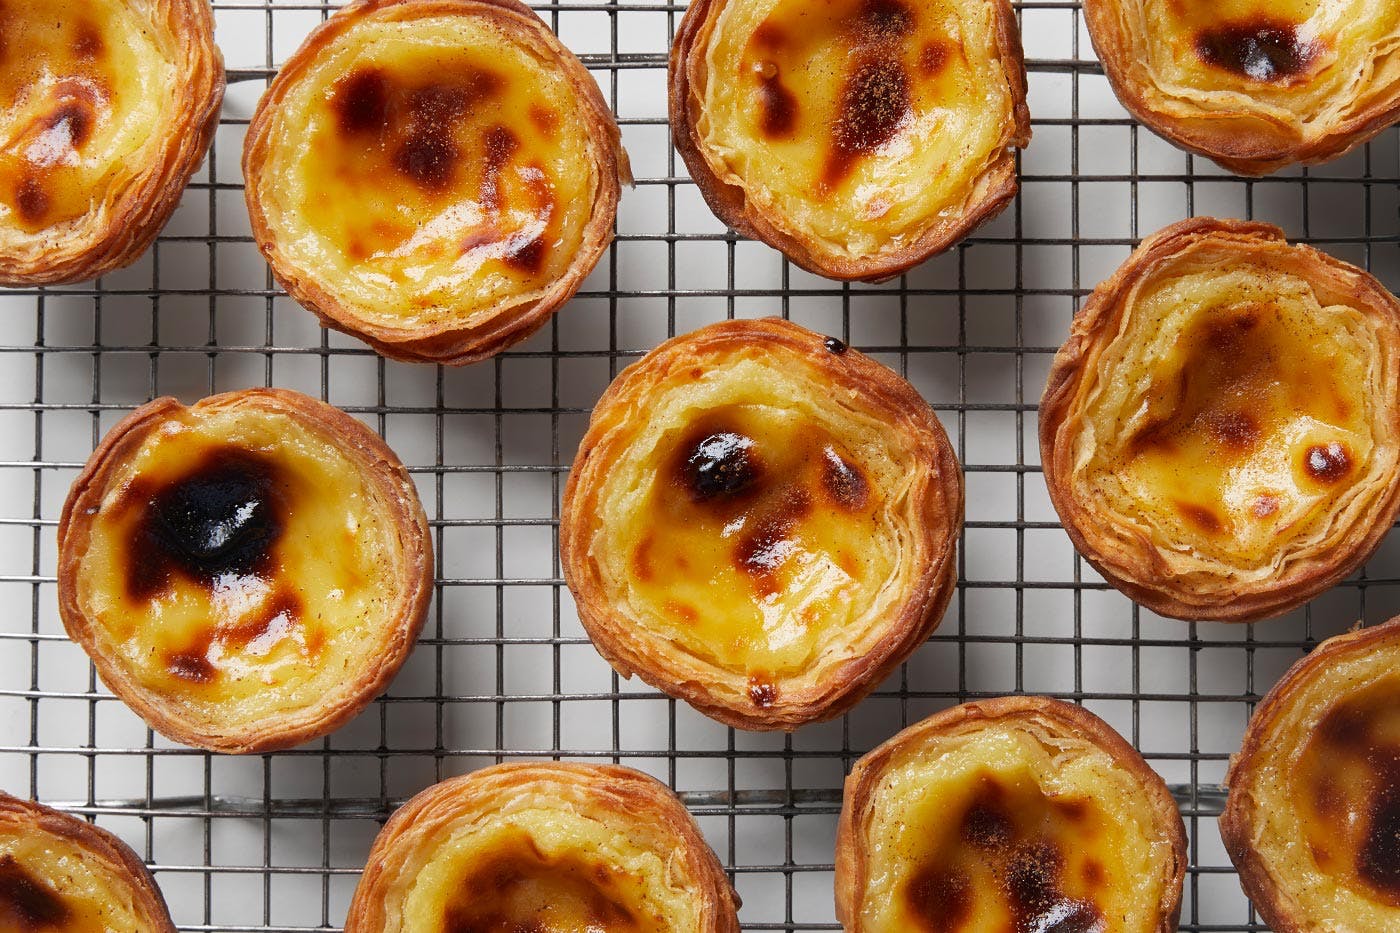 🥖 How Many Baked Goods Have You Tried from Around the World? Portuguese Egg Tarts